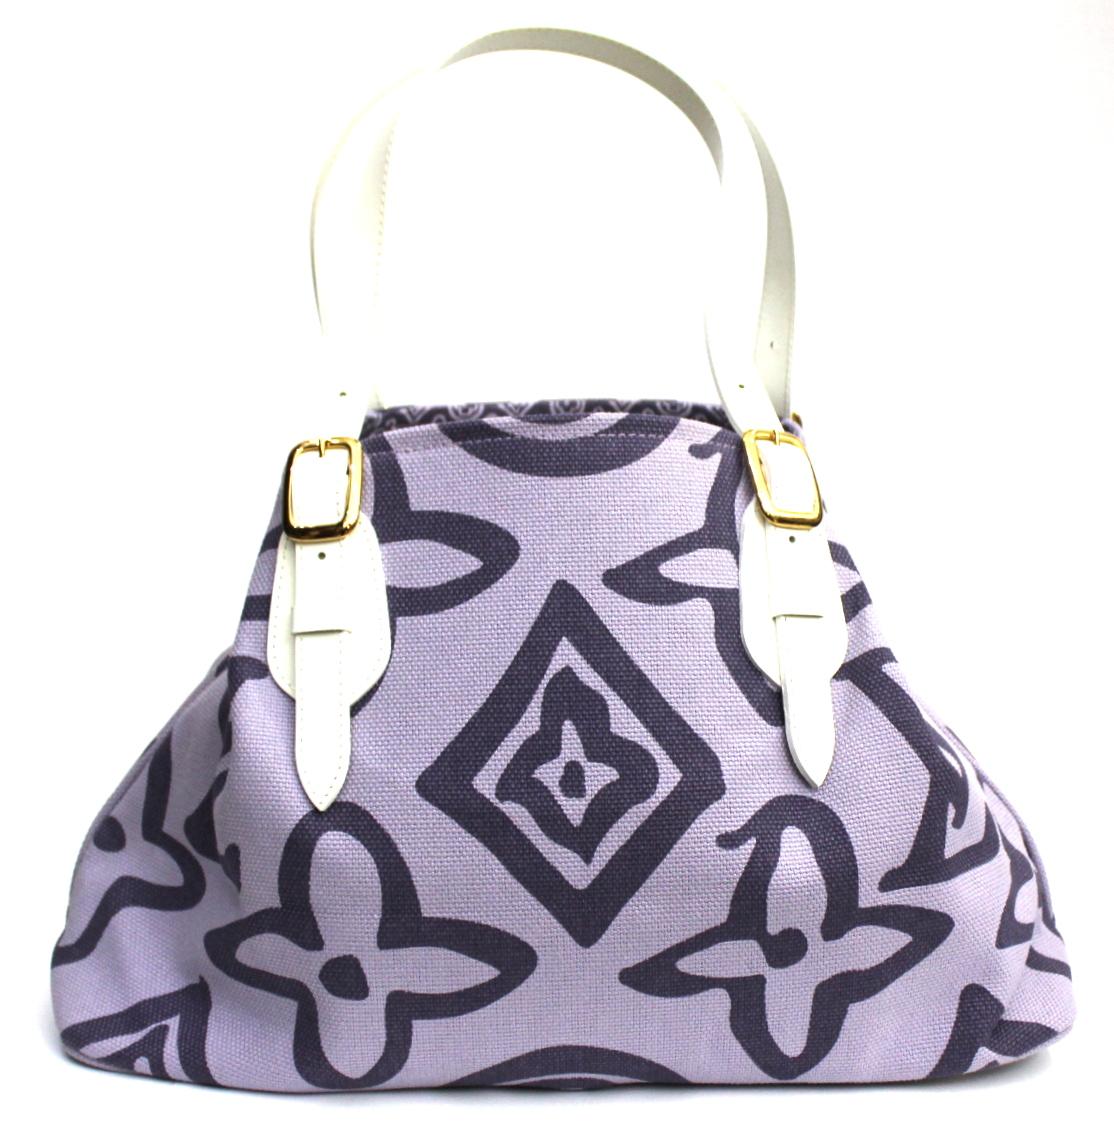 A chic and artsy blend makes this Louis Vuitton Limited Edition Lilac Tahitienne Cabas PM Bag truly desirable. This fabulous tote can be carried on the shoulder or on the arm and has a spacious interior. A 